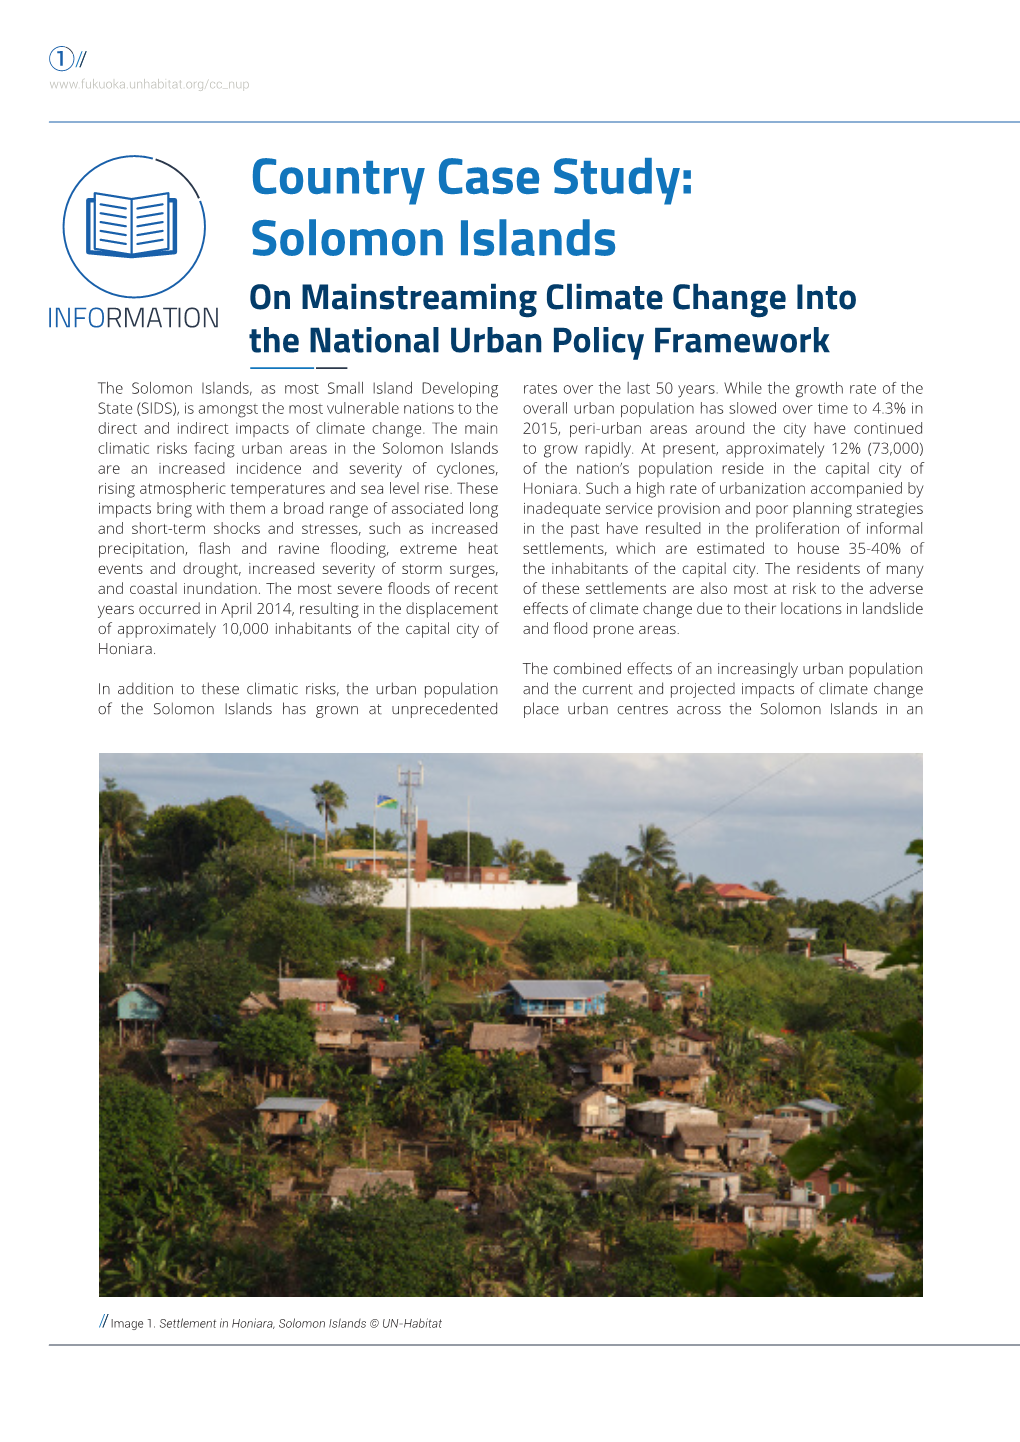 Solomon Islands on Mainstreaming Climate Change Into INFORMATION the National Urban Policy Framework